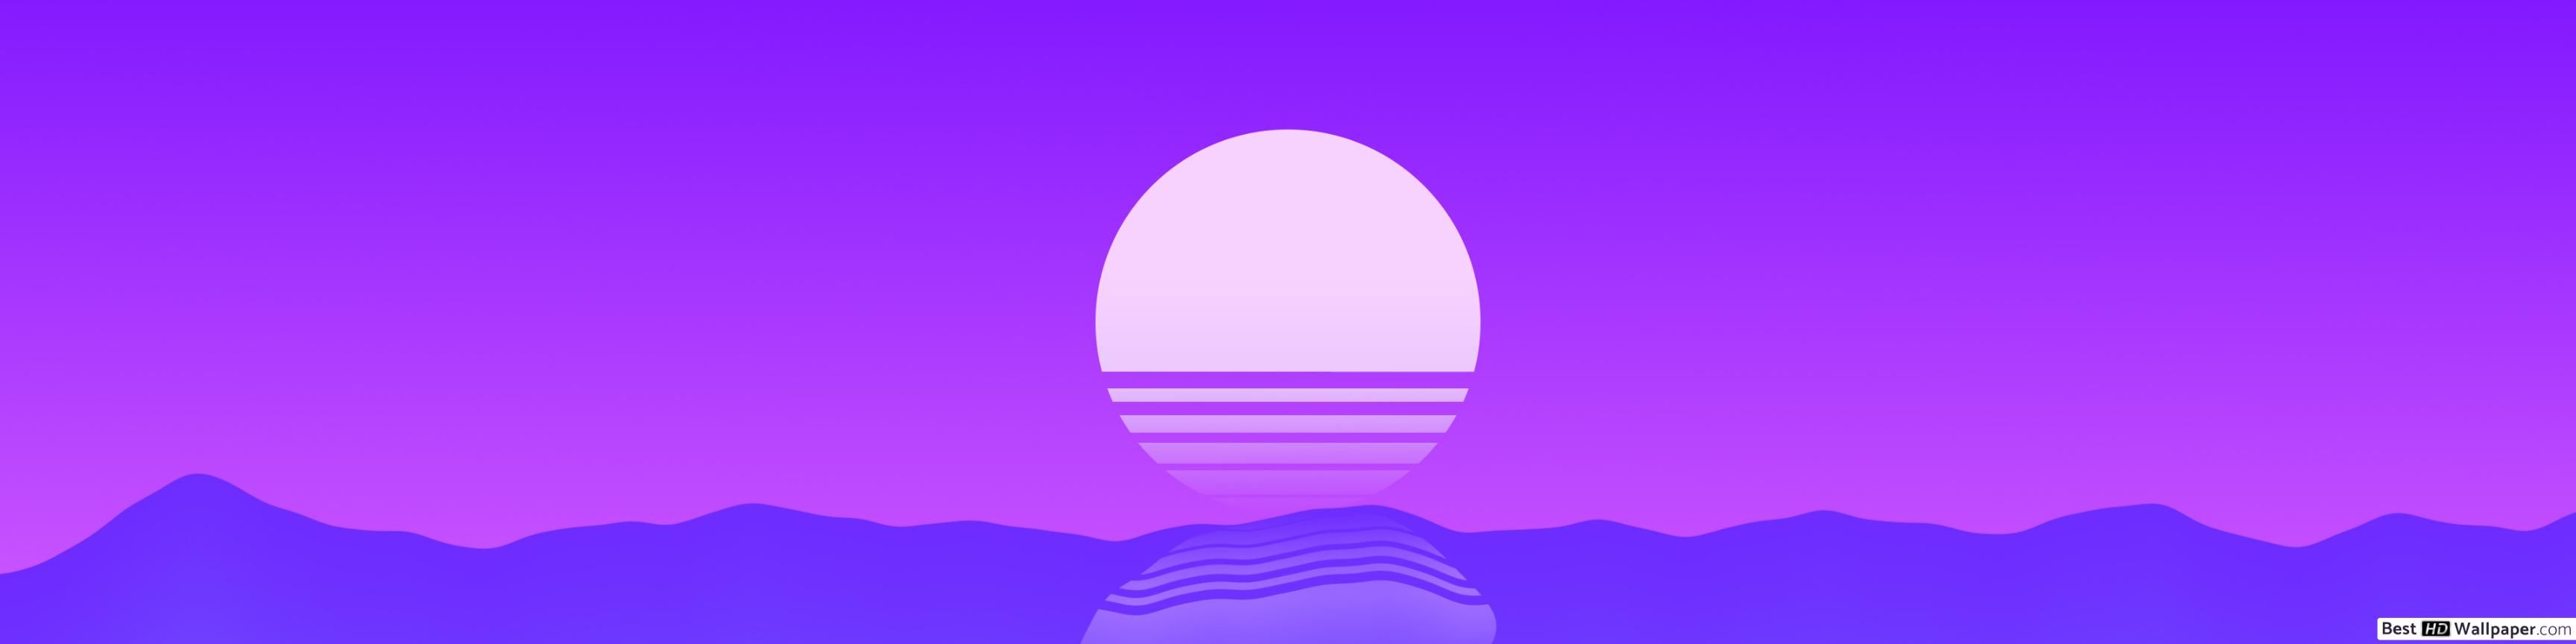 Sunset Retro Wallpapers - Wallpaper Cave